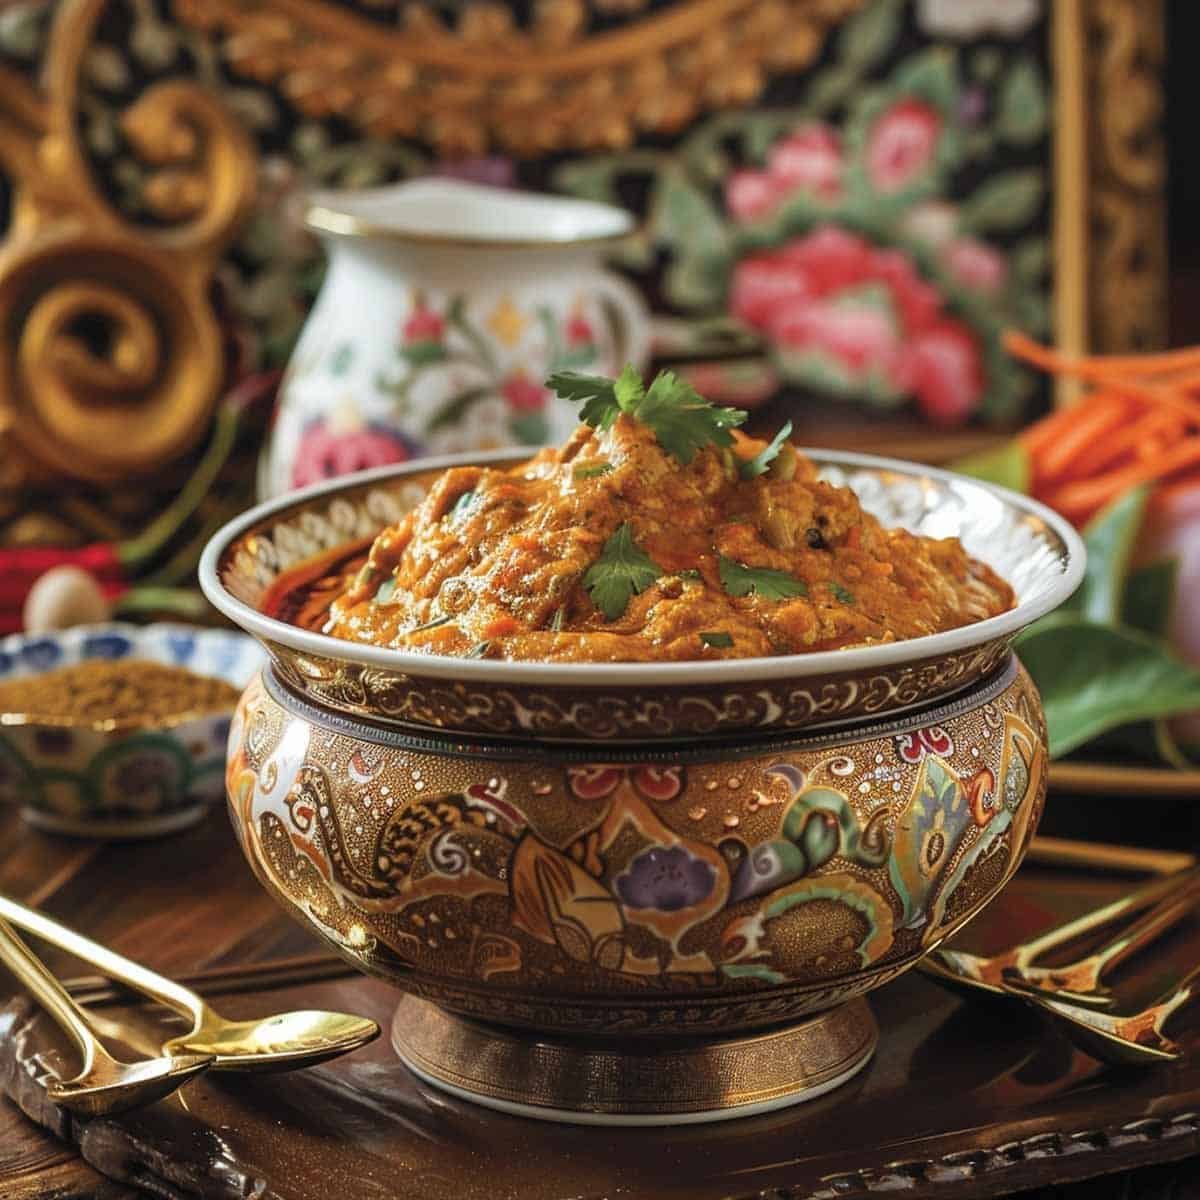 Panang curry paste served in a decorative Asian-style bowl